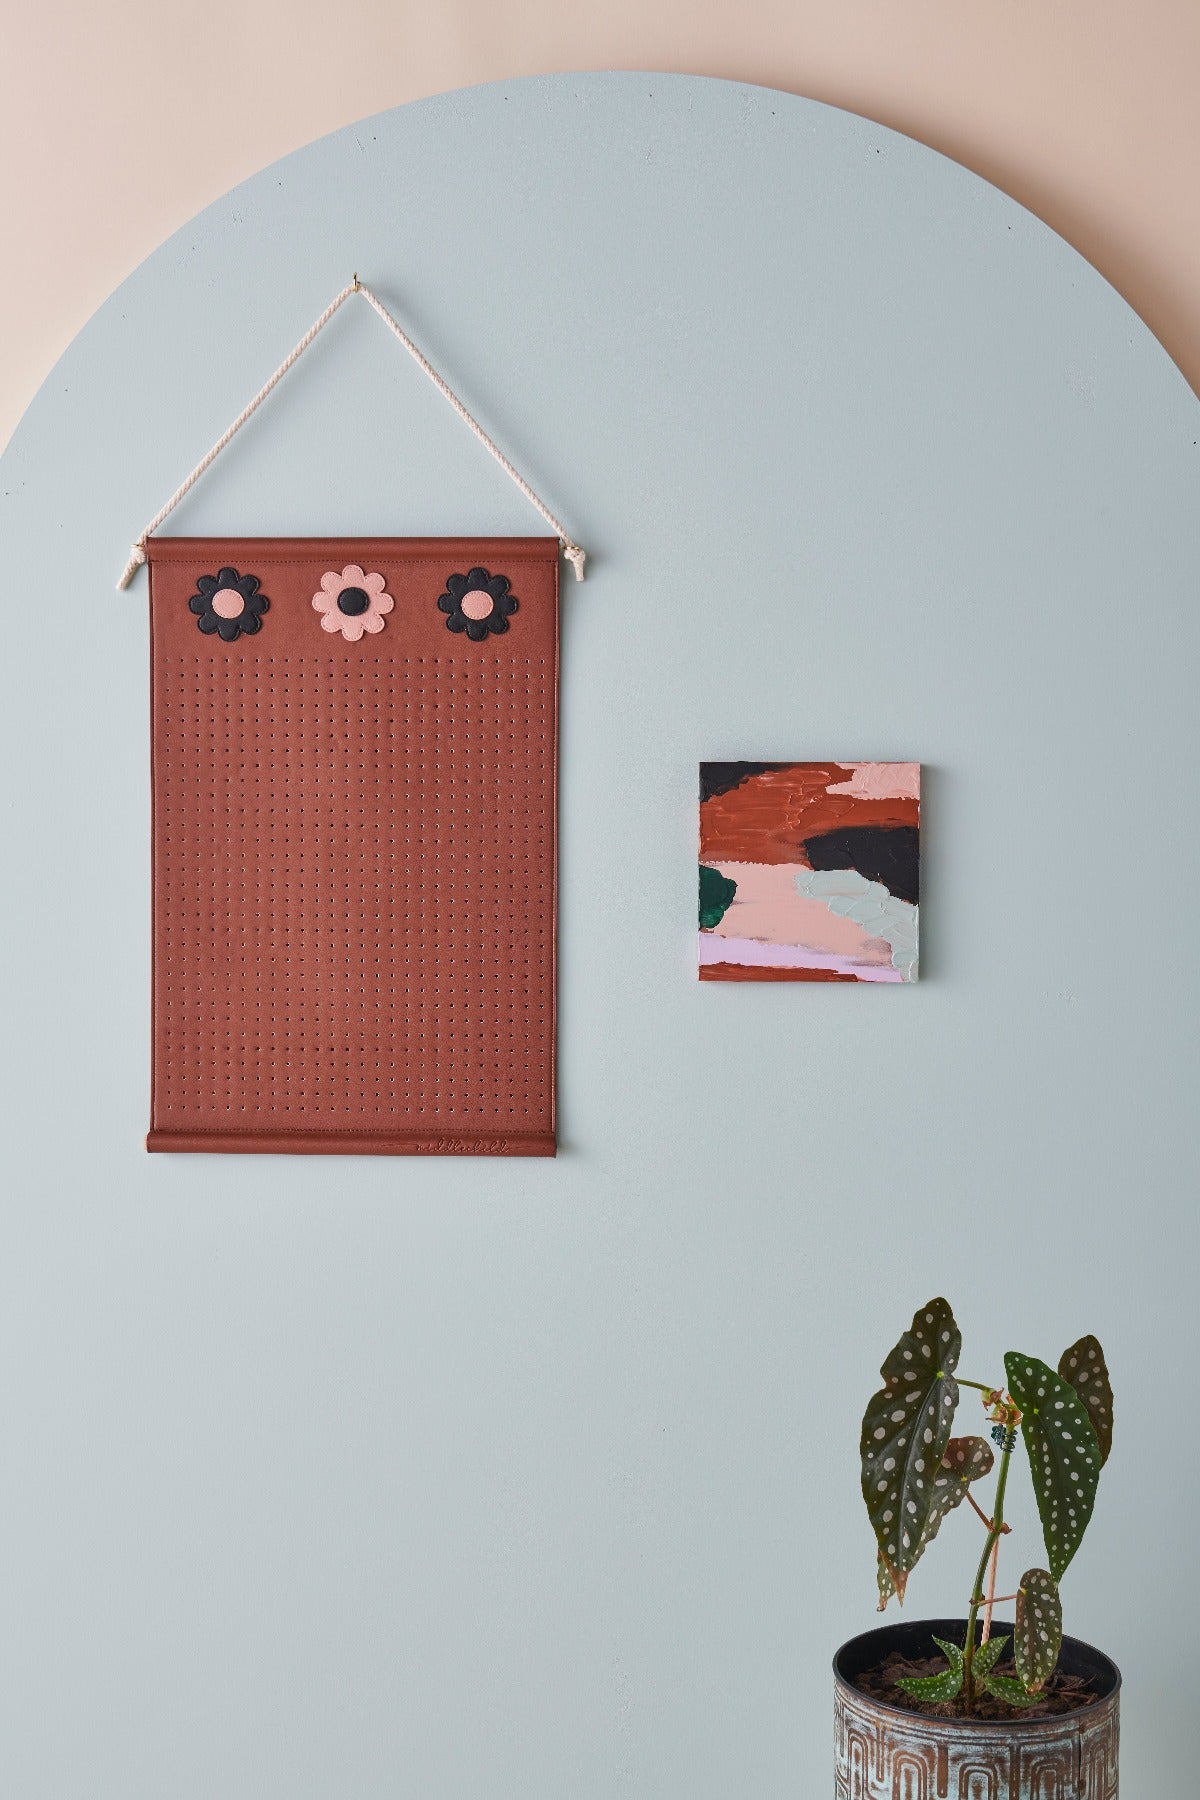 A brown wall hanger with three brown and pink flowers at the top is hung by a rope and styled against a blue arch and pink wall. Next to the wall hanger is a small square abstract painting and a pot plant with spotted leaves sits below the painting.